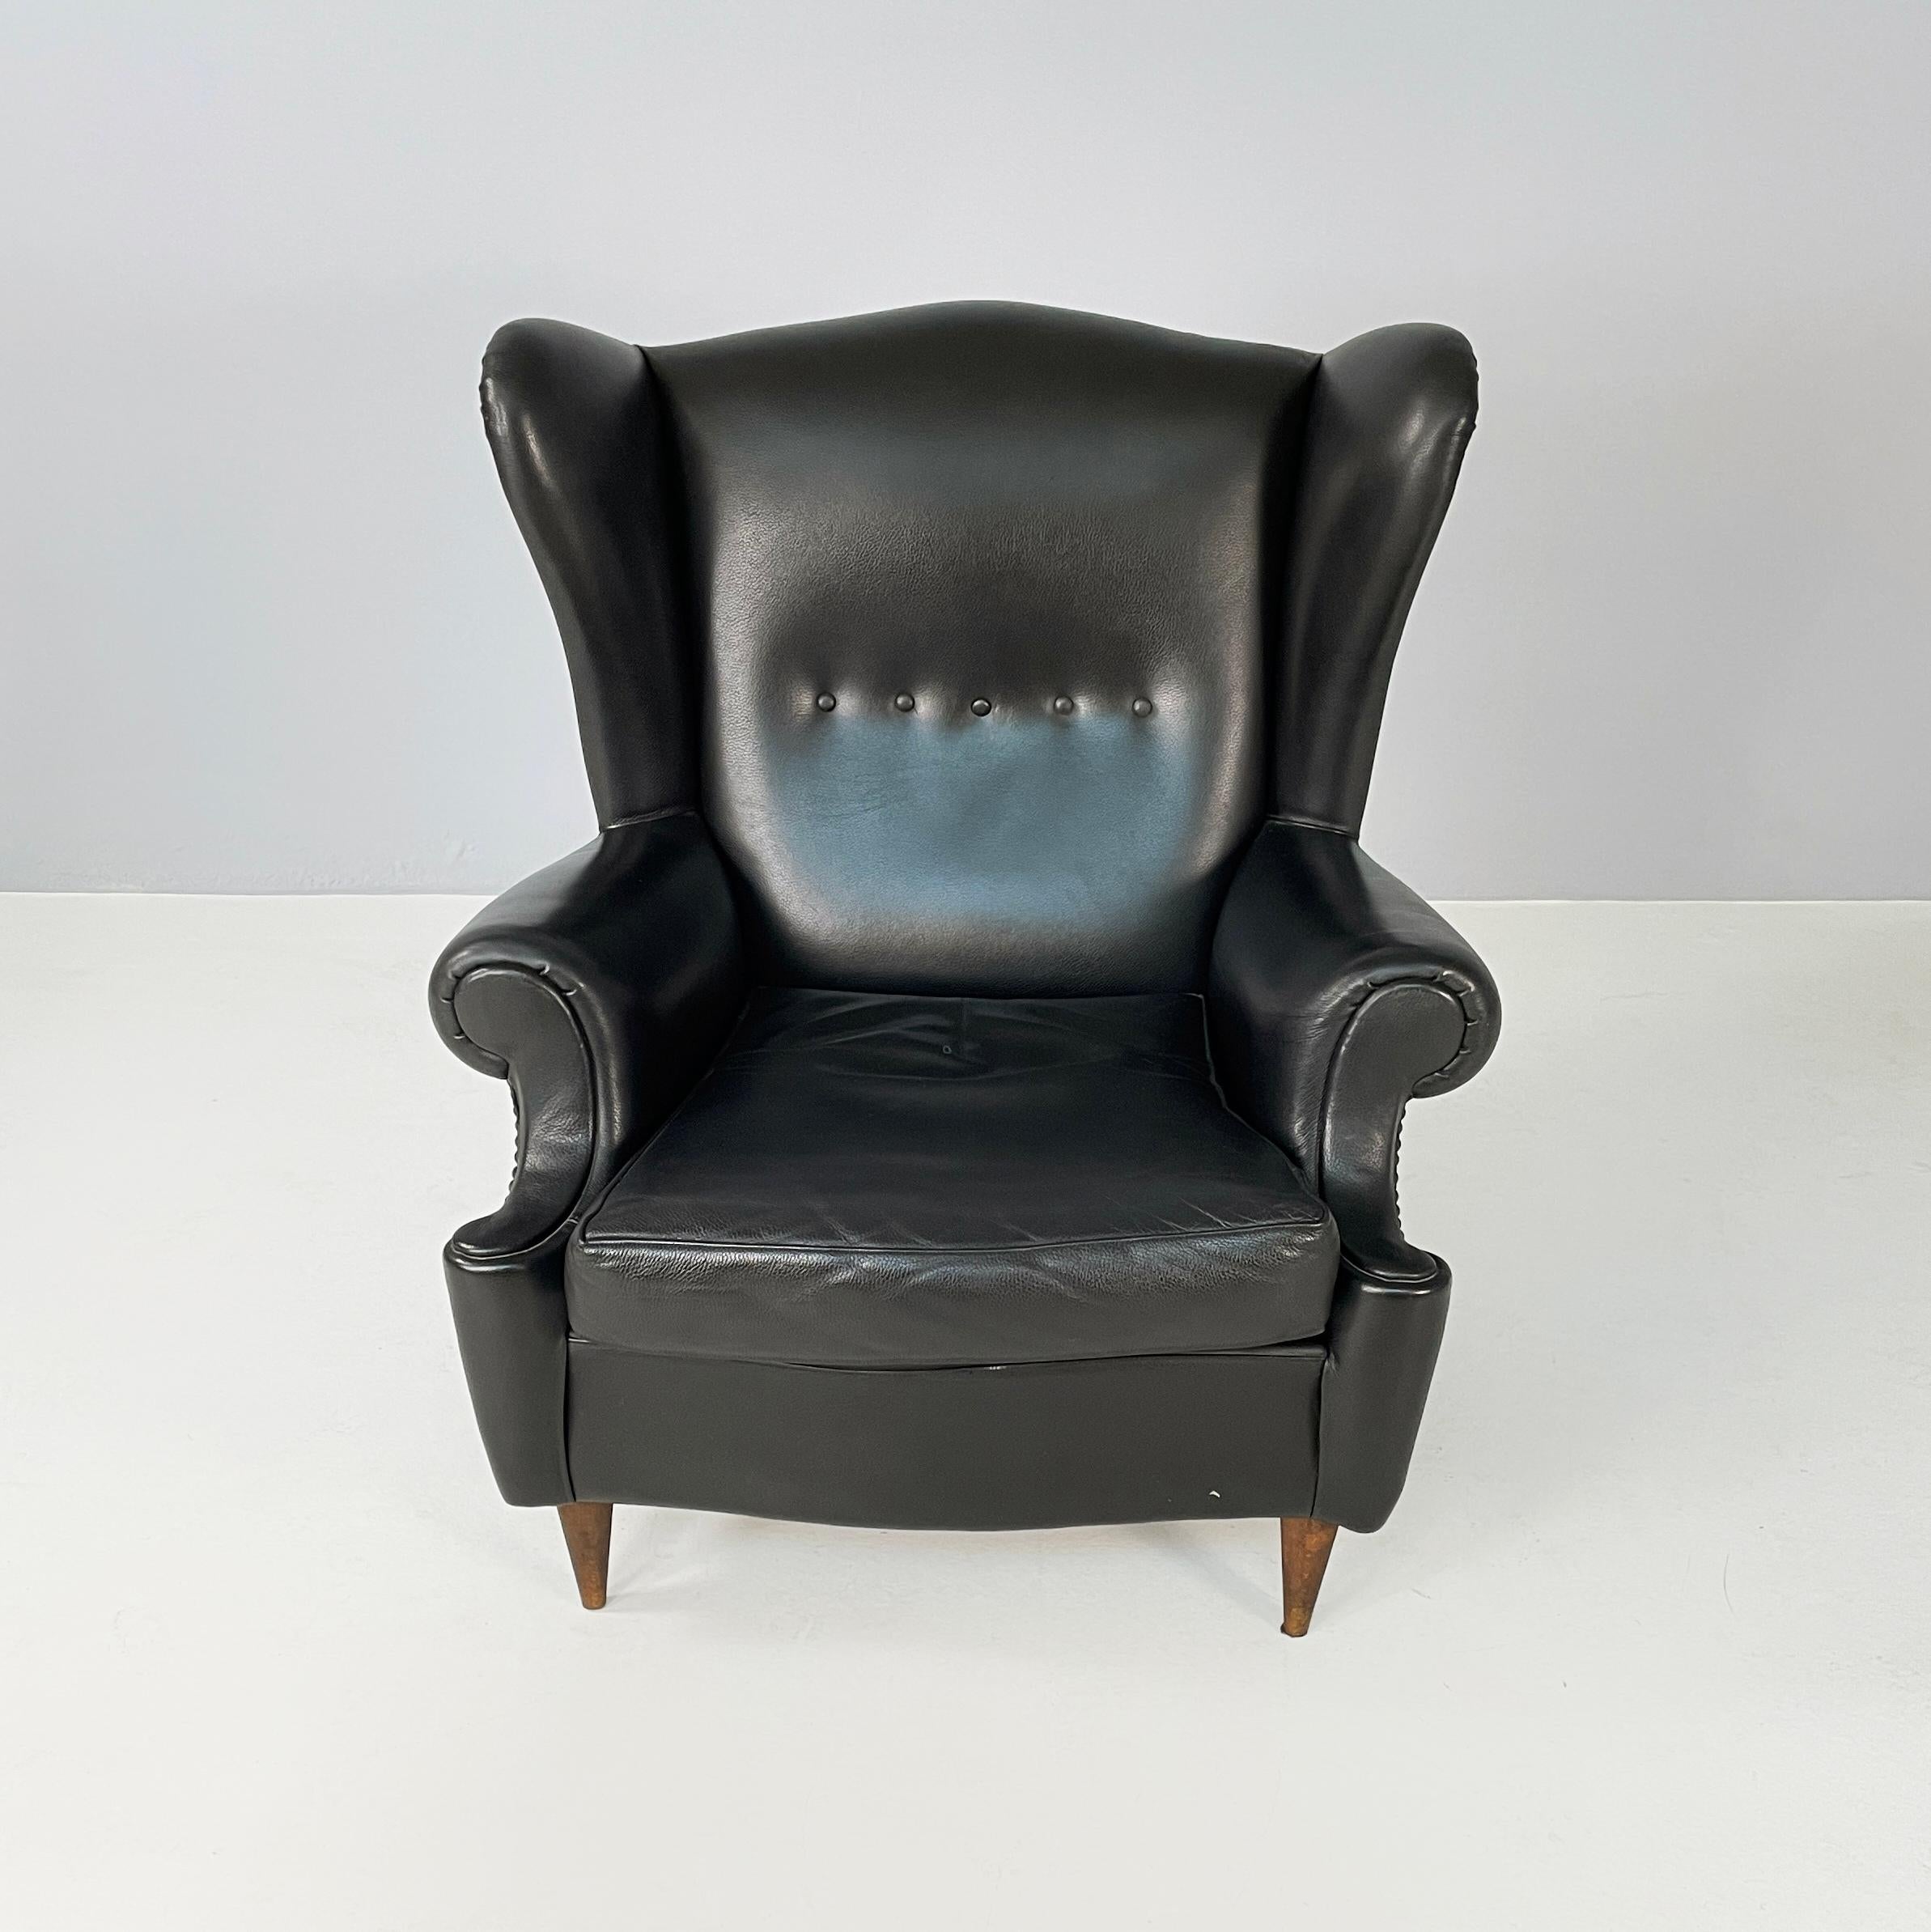 Italian modern Bergere Armchair in black leather and wood, 1970s
Bergere armchair fully padded and covered in black leather. The high back features 5 buttons. The seat is made up of a padded square cushion. The armrests have a rounded silhouette.